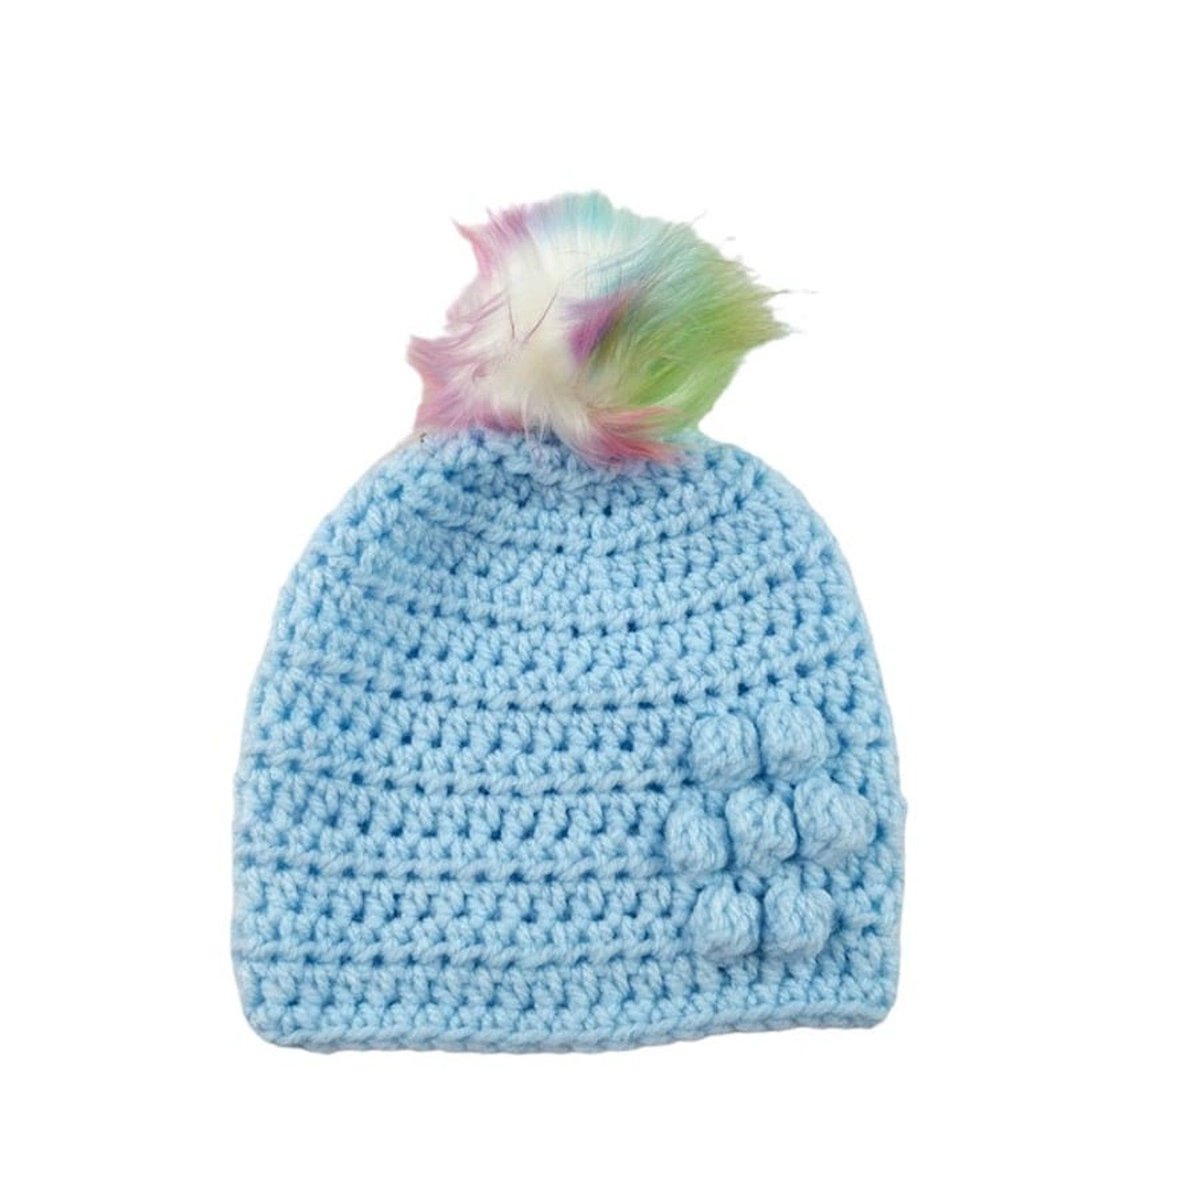 Wrap your bundle of joy in style with our blue crocheted baby hat! It features a lovely flower detail and detachable faux fur pompoms in vibrant hues. Shop now on #Etsy! knittingtopia.etsy.com/listing/170952… #knittingtopia #Handmade #BabyFashion #MHHSBD #craftbizparty